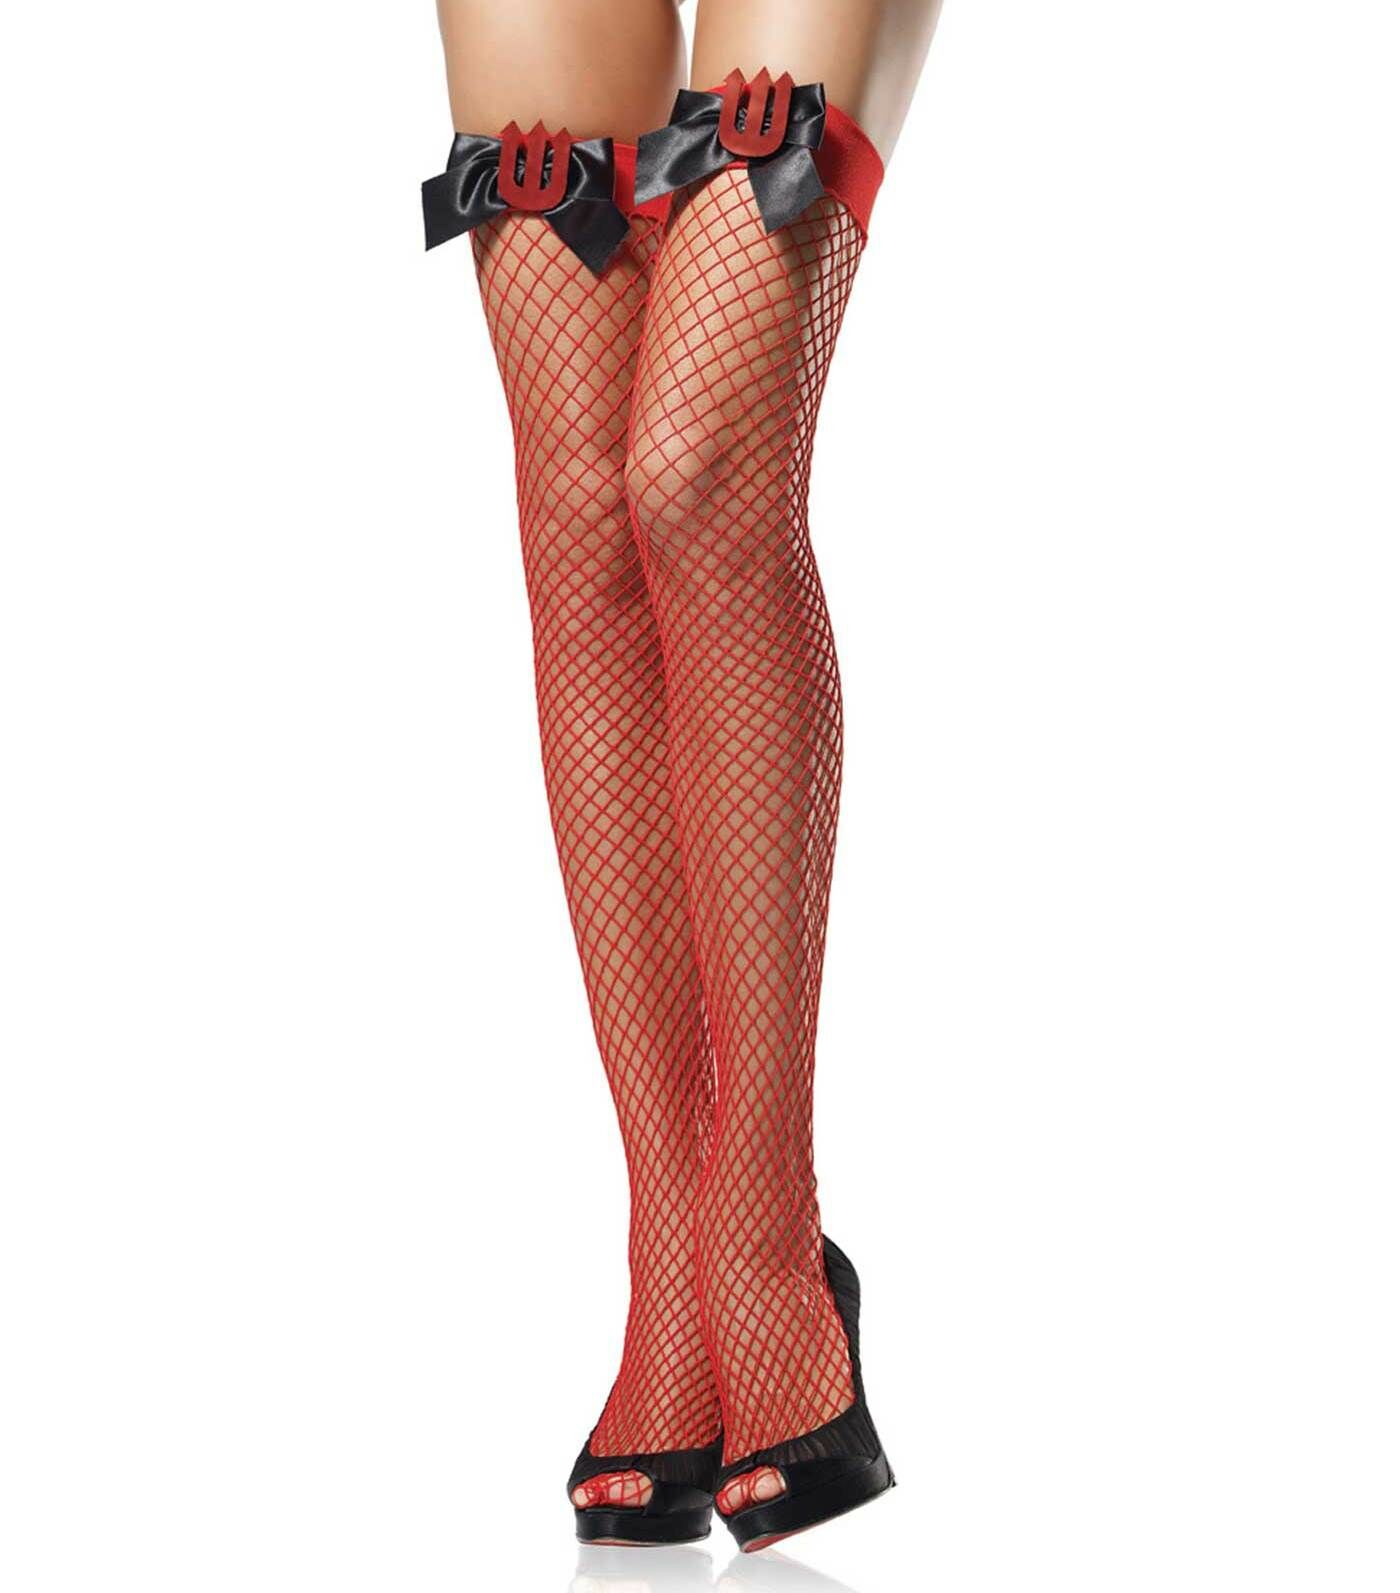 Devil Pitchfork Industrial Net Stockings with Bow